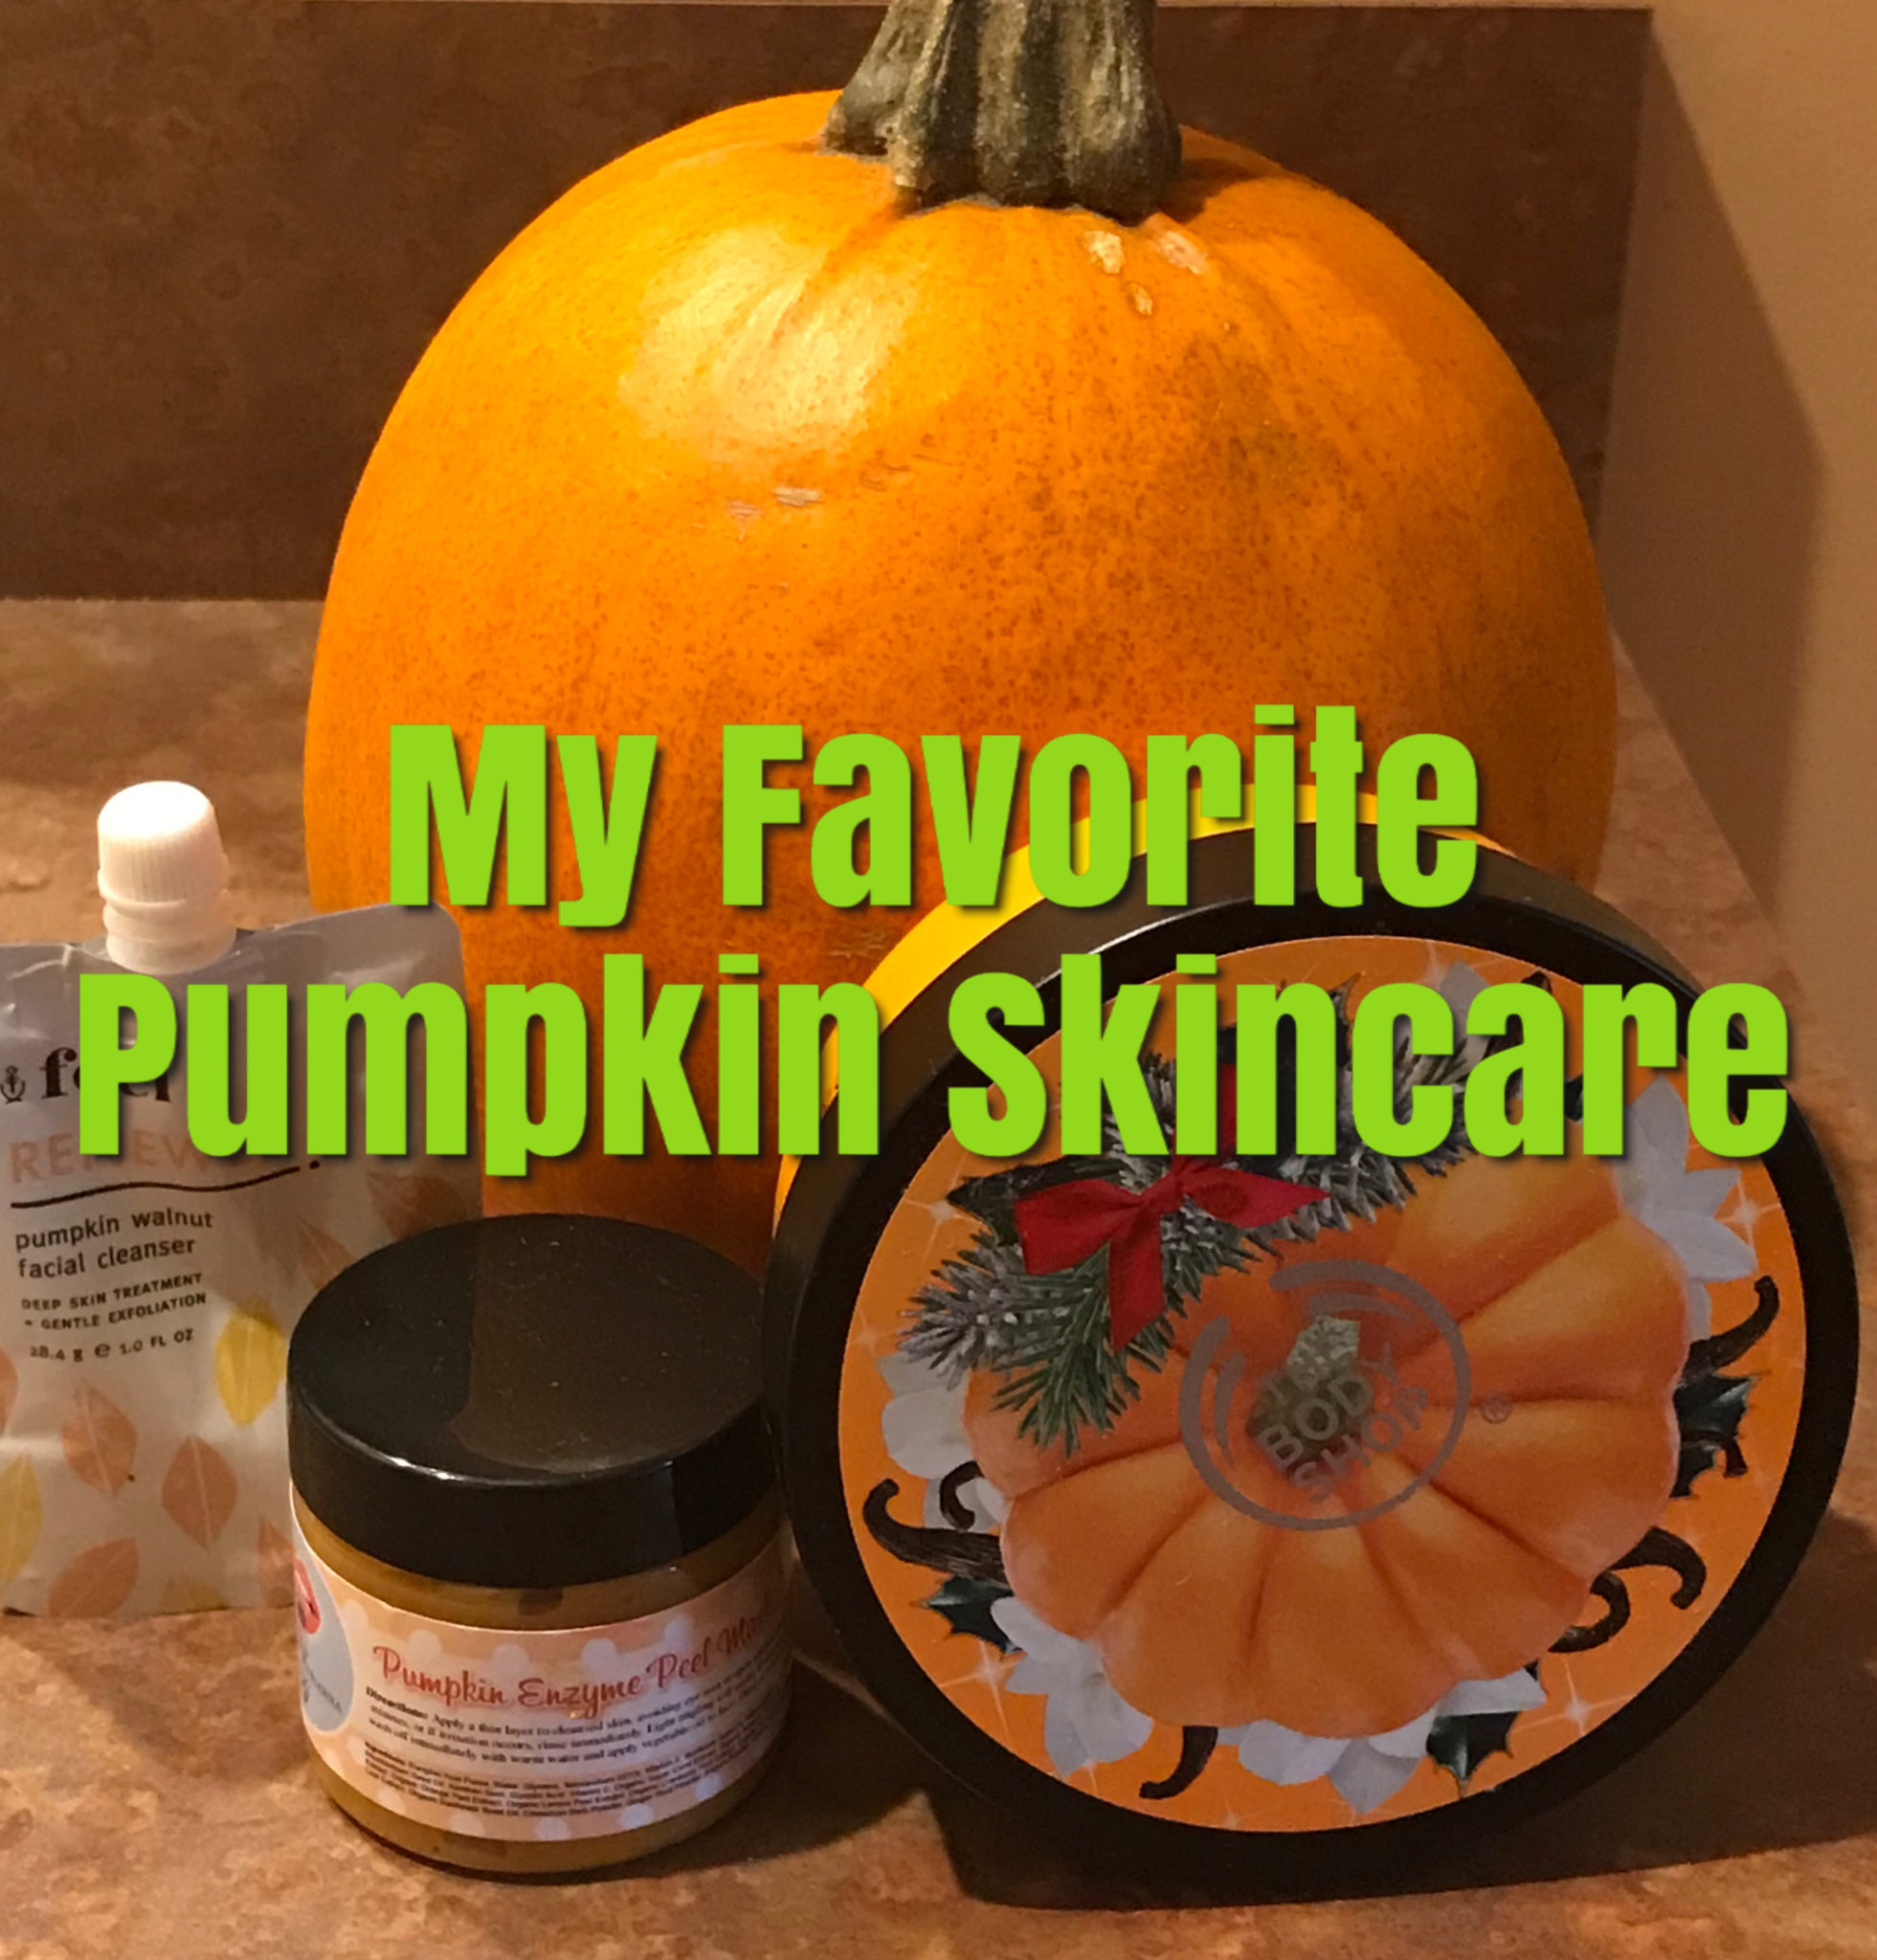 my favorite pumpkin skincare and body care for 2018, neversaydiebeauty.com